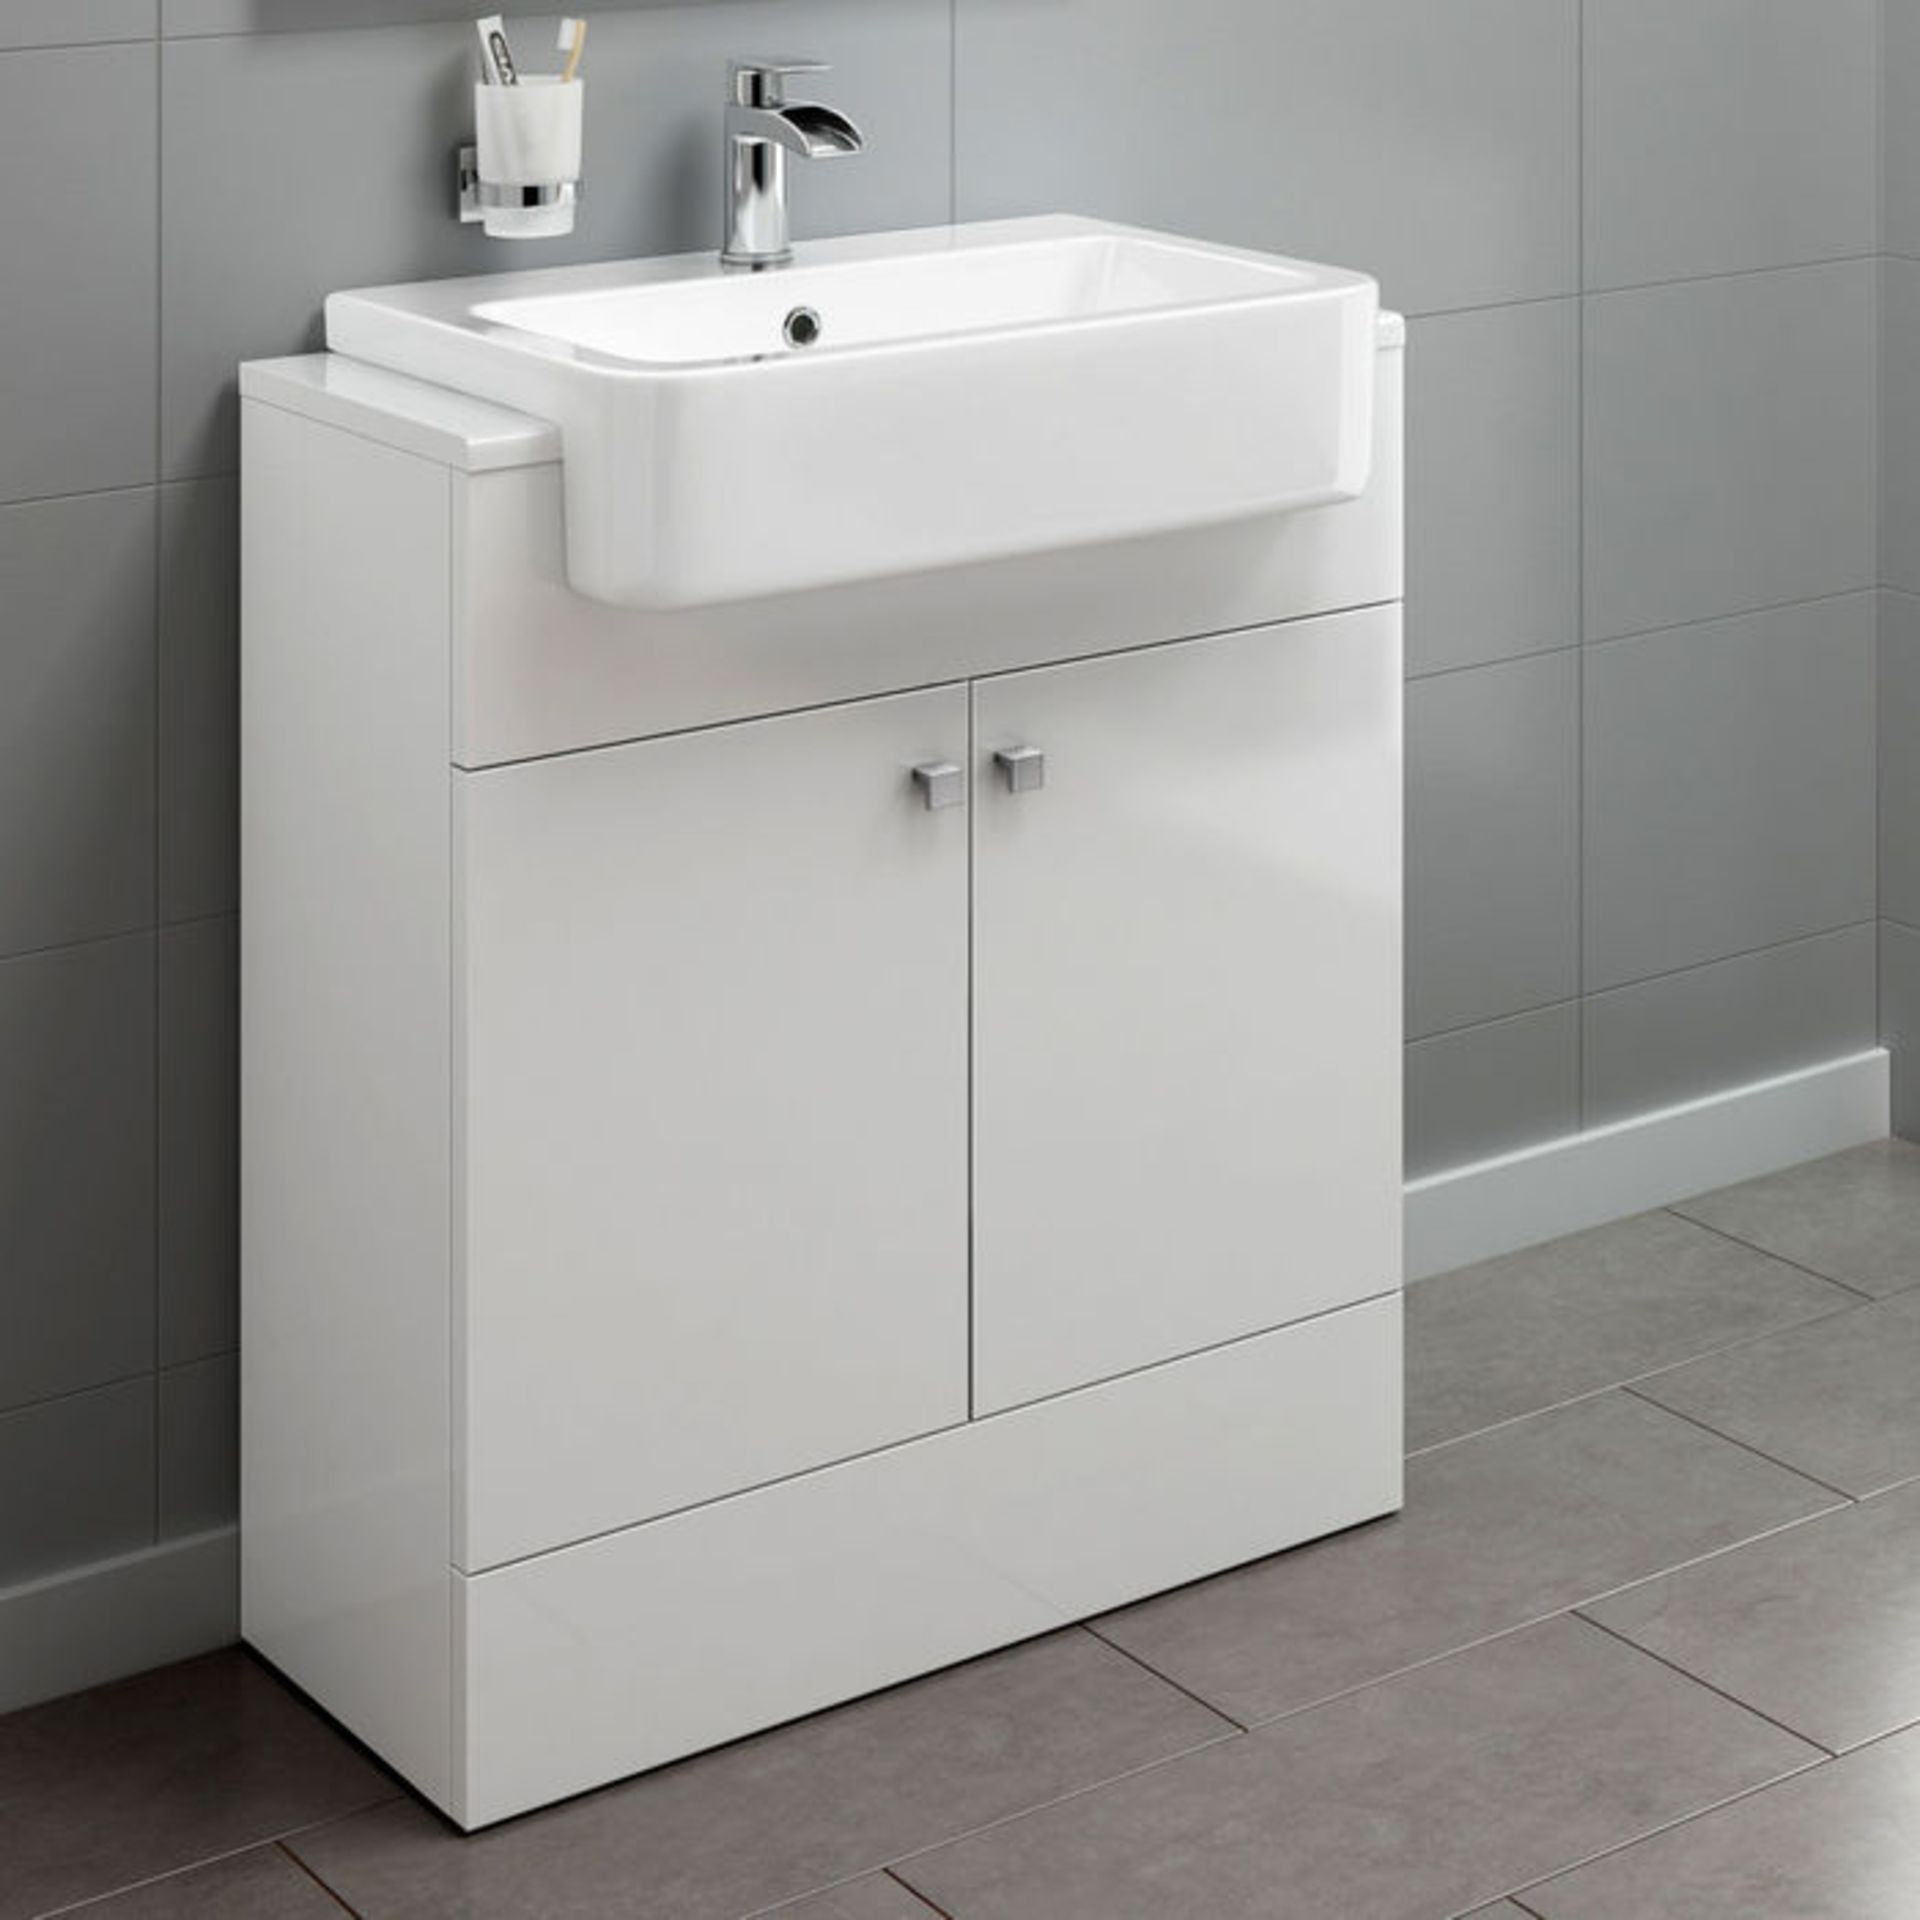 (AH29) 660mm Harper Gloss White Basin Vanity Unit - Floor Standing. RRP £499.99. COMES COMPLETE WITH